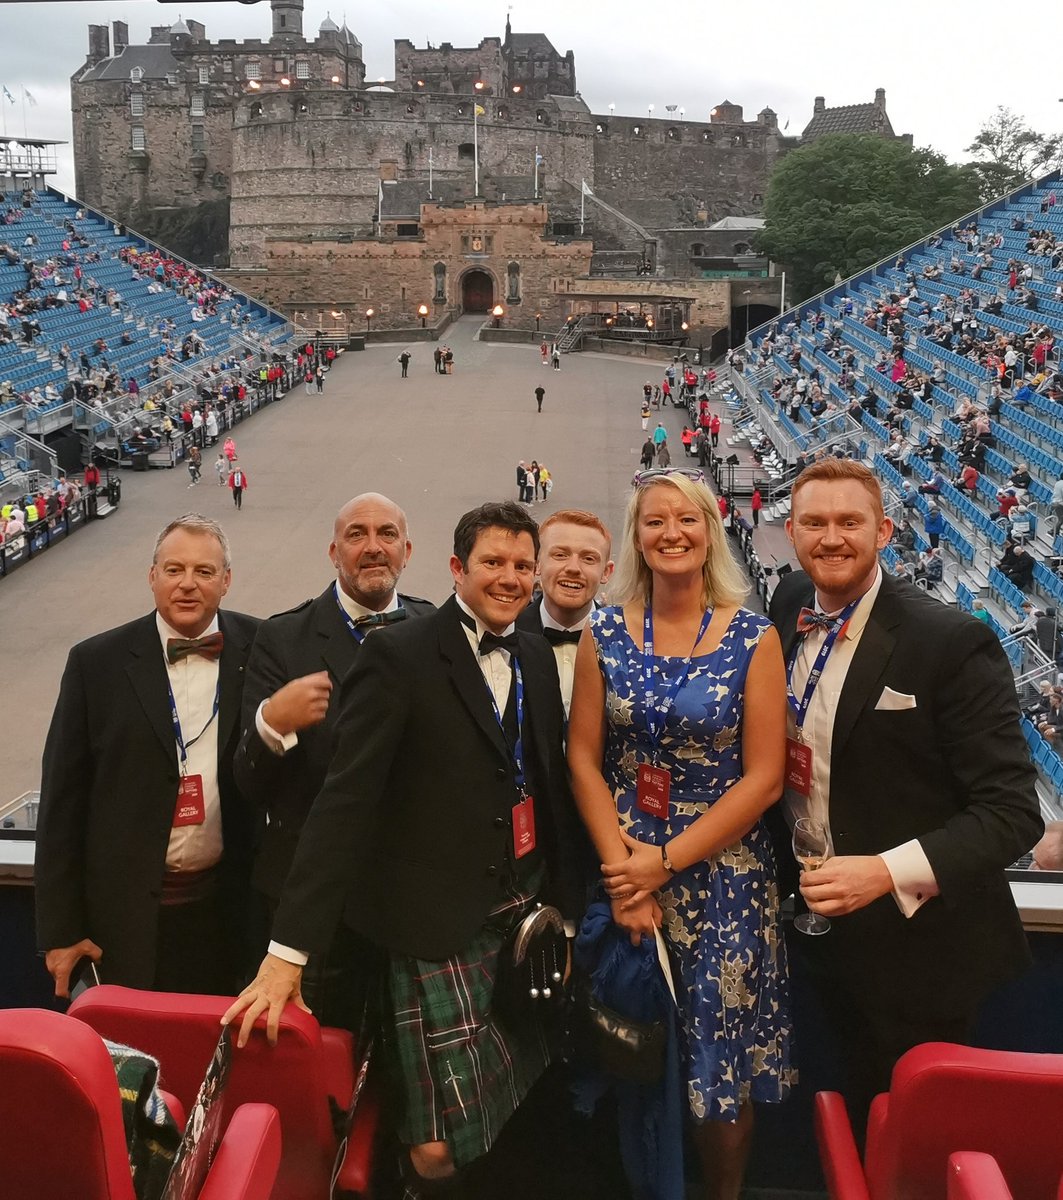 Brilliant 2 have a third sector collab in the Royal Gallery at the @EdinburghTattoo preview night thanks to @ArmyComd51X @BritishArmy - SMILE @scotsportassoc @paul_reddish @DofEBarry @LeaskGeoff @chrisloughton97